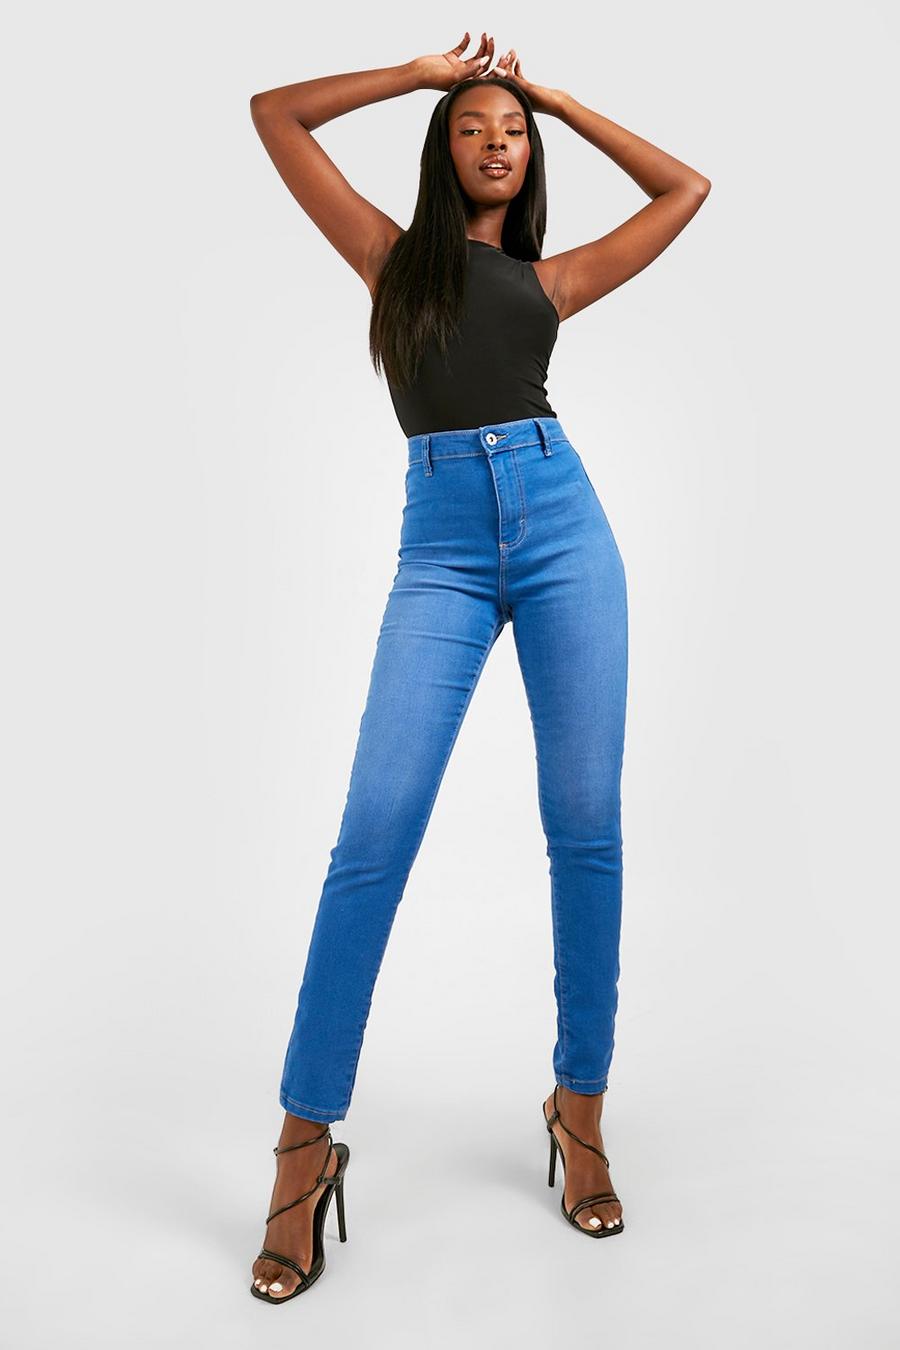 https://media.boohoo.com/i/boohoo/fzz37303_mid%20blue_xl/female-mid%20blue-recycled-high-waisted-butt-shaping-jeans/?w=900&qlt=default&fmt.jp2.qlt=70&fmt=auto&sm=fit